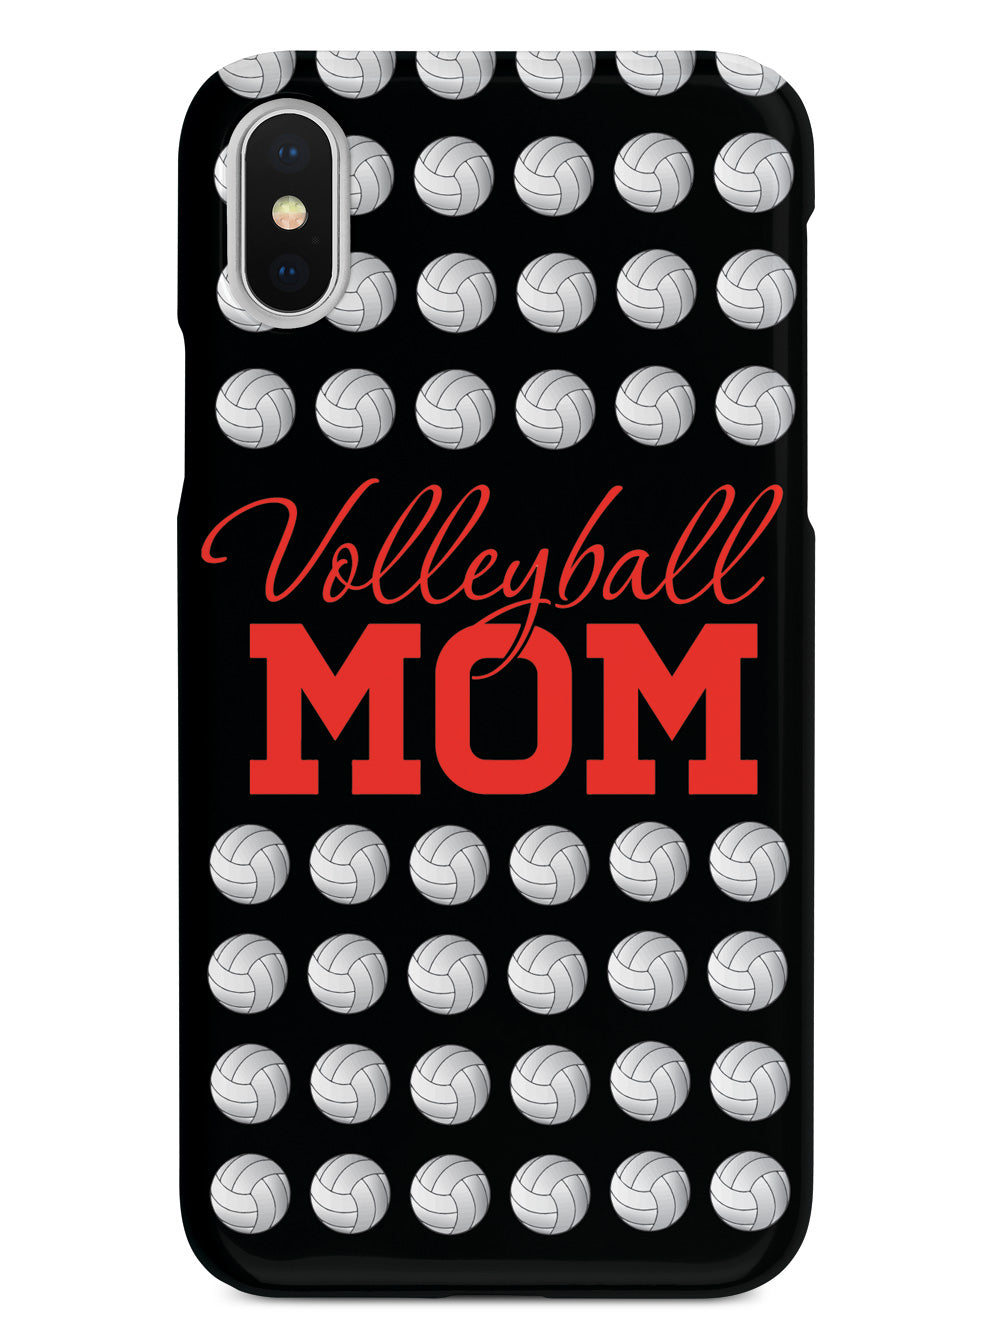 Volleyball Mom Case